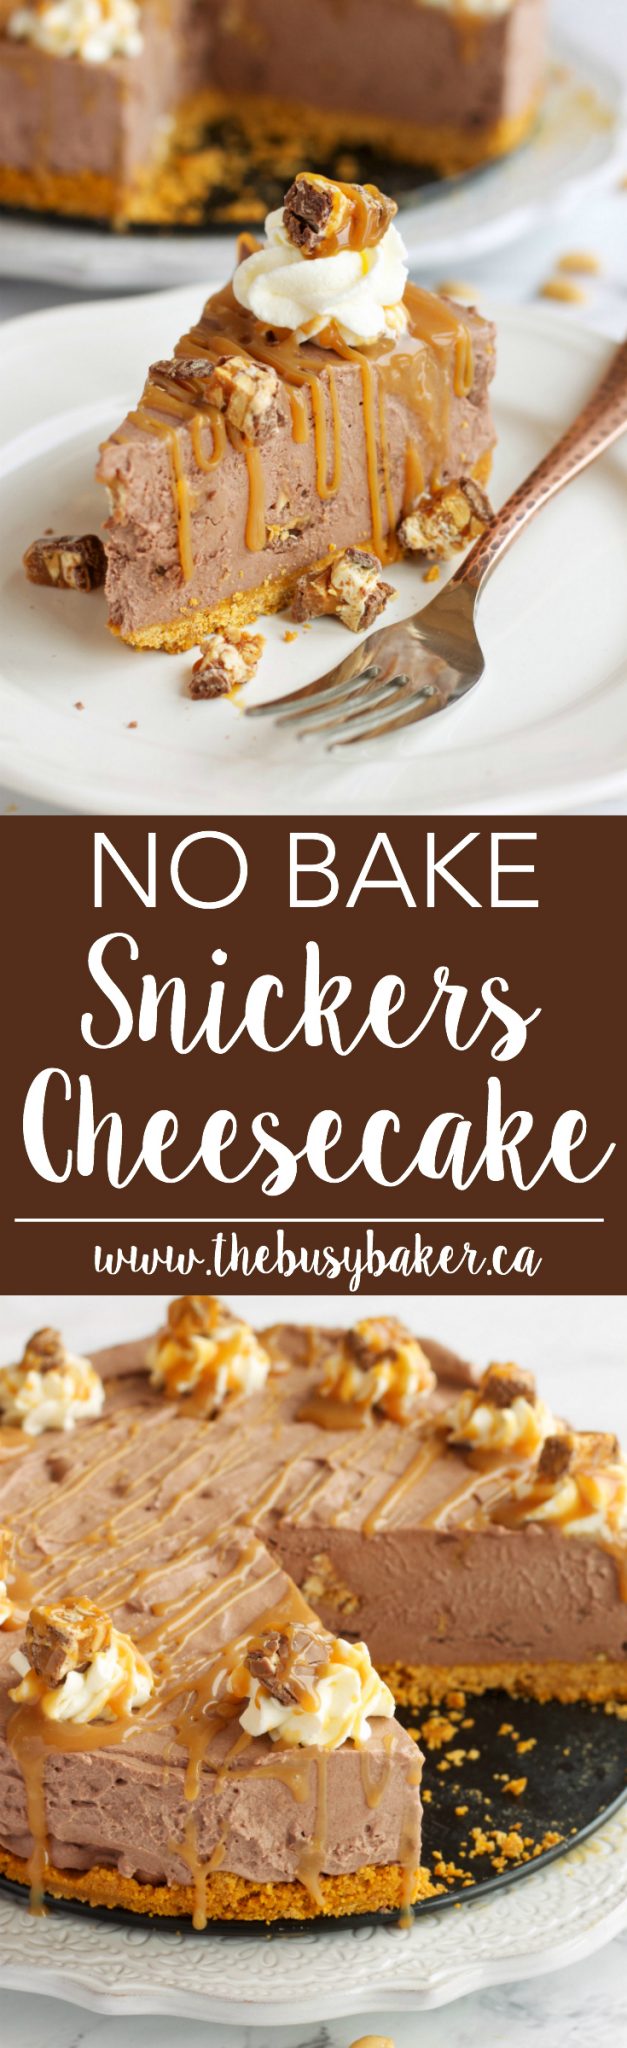 A deliciously simple Easy Snickers No Bake Cheesecake Recipe that will satisfy every cheesecake craving! Recipe from thebusybaker.ca via @busybakerblog